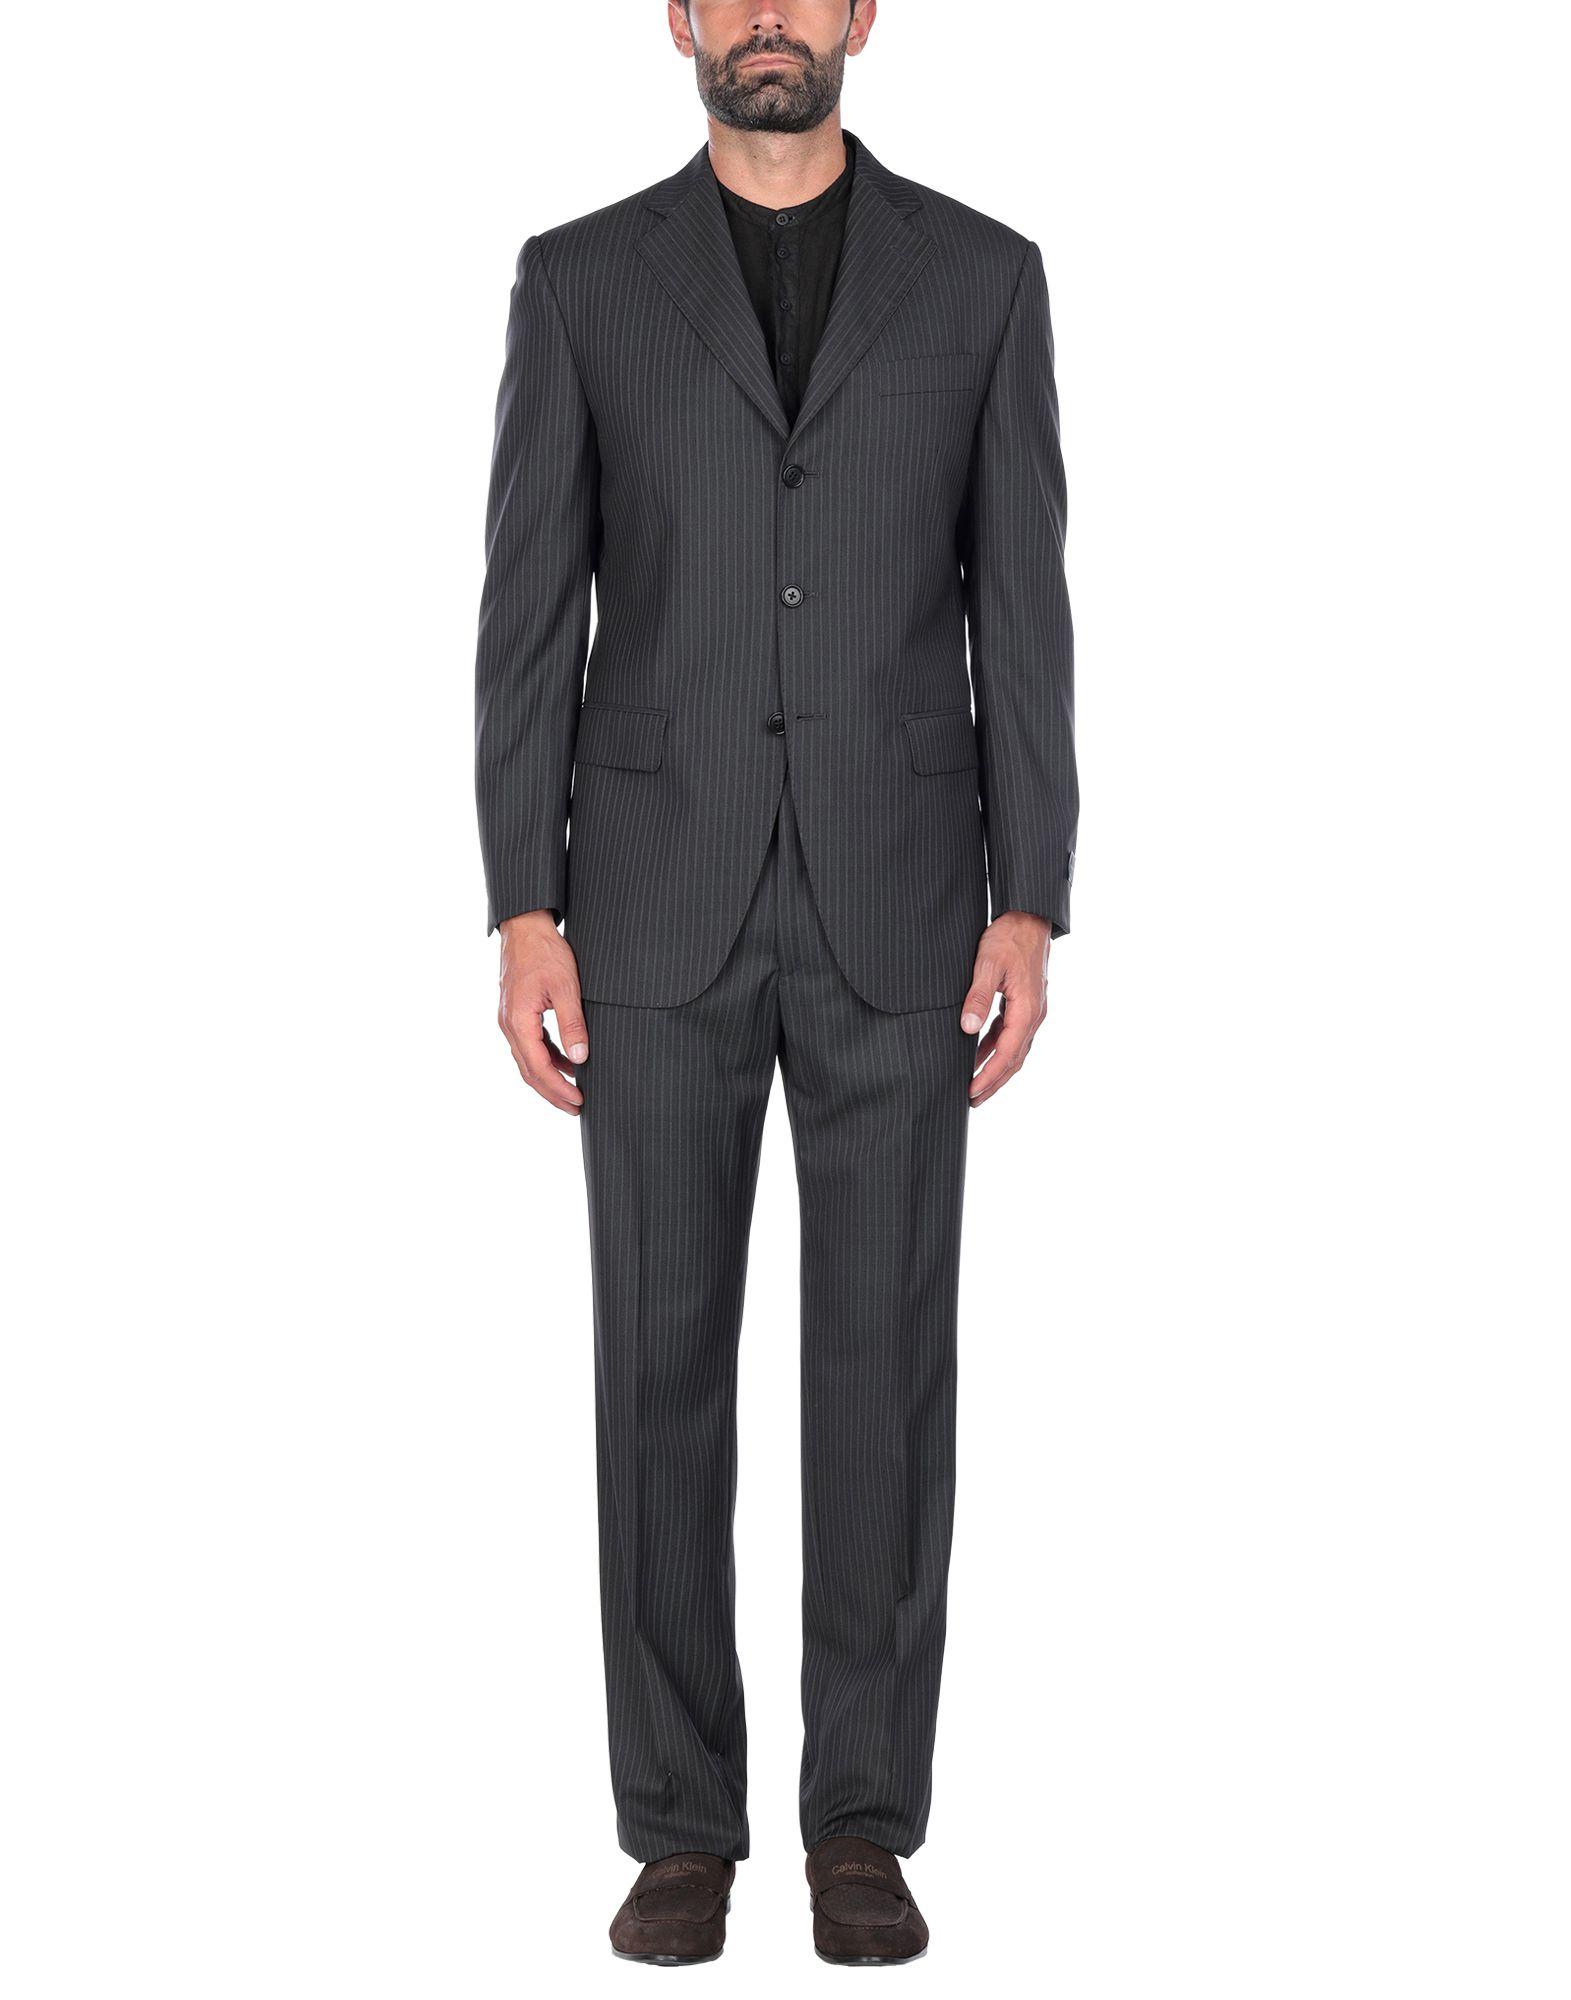 Tombolini Wool Suit in Black for Men - Lyst